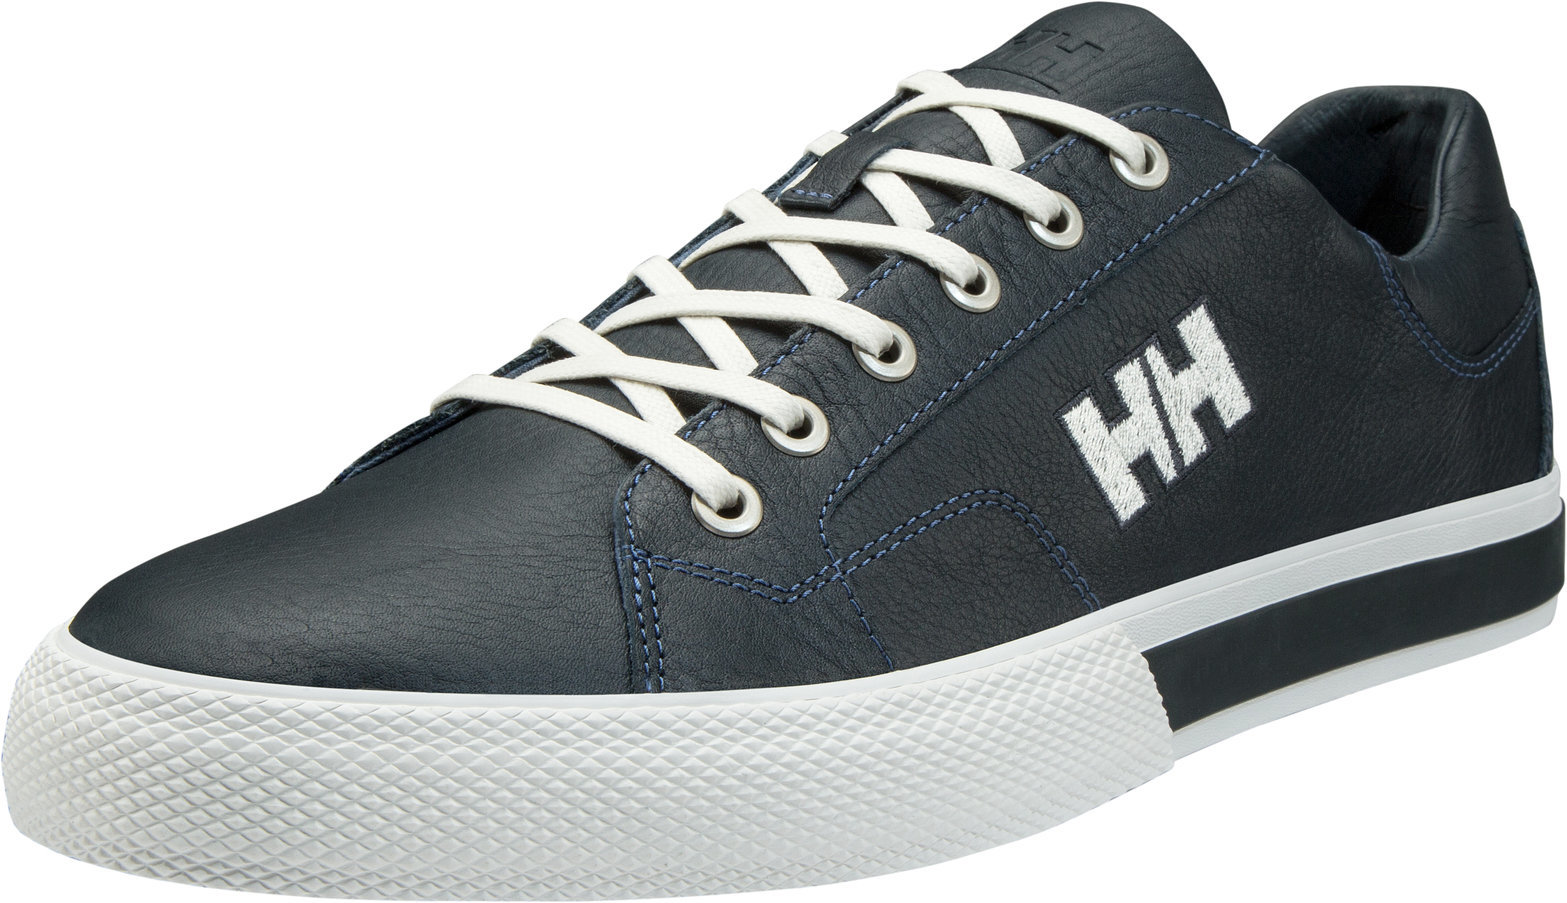 Mens Sailing Shoes Helly Hansen Fjord LV-2 Off Navy - 42.5